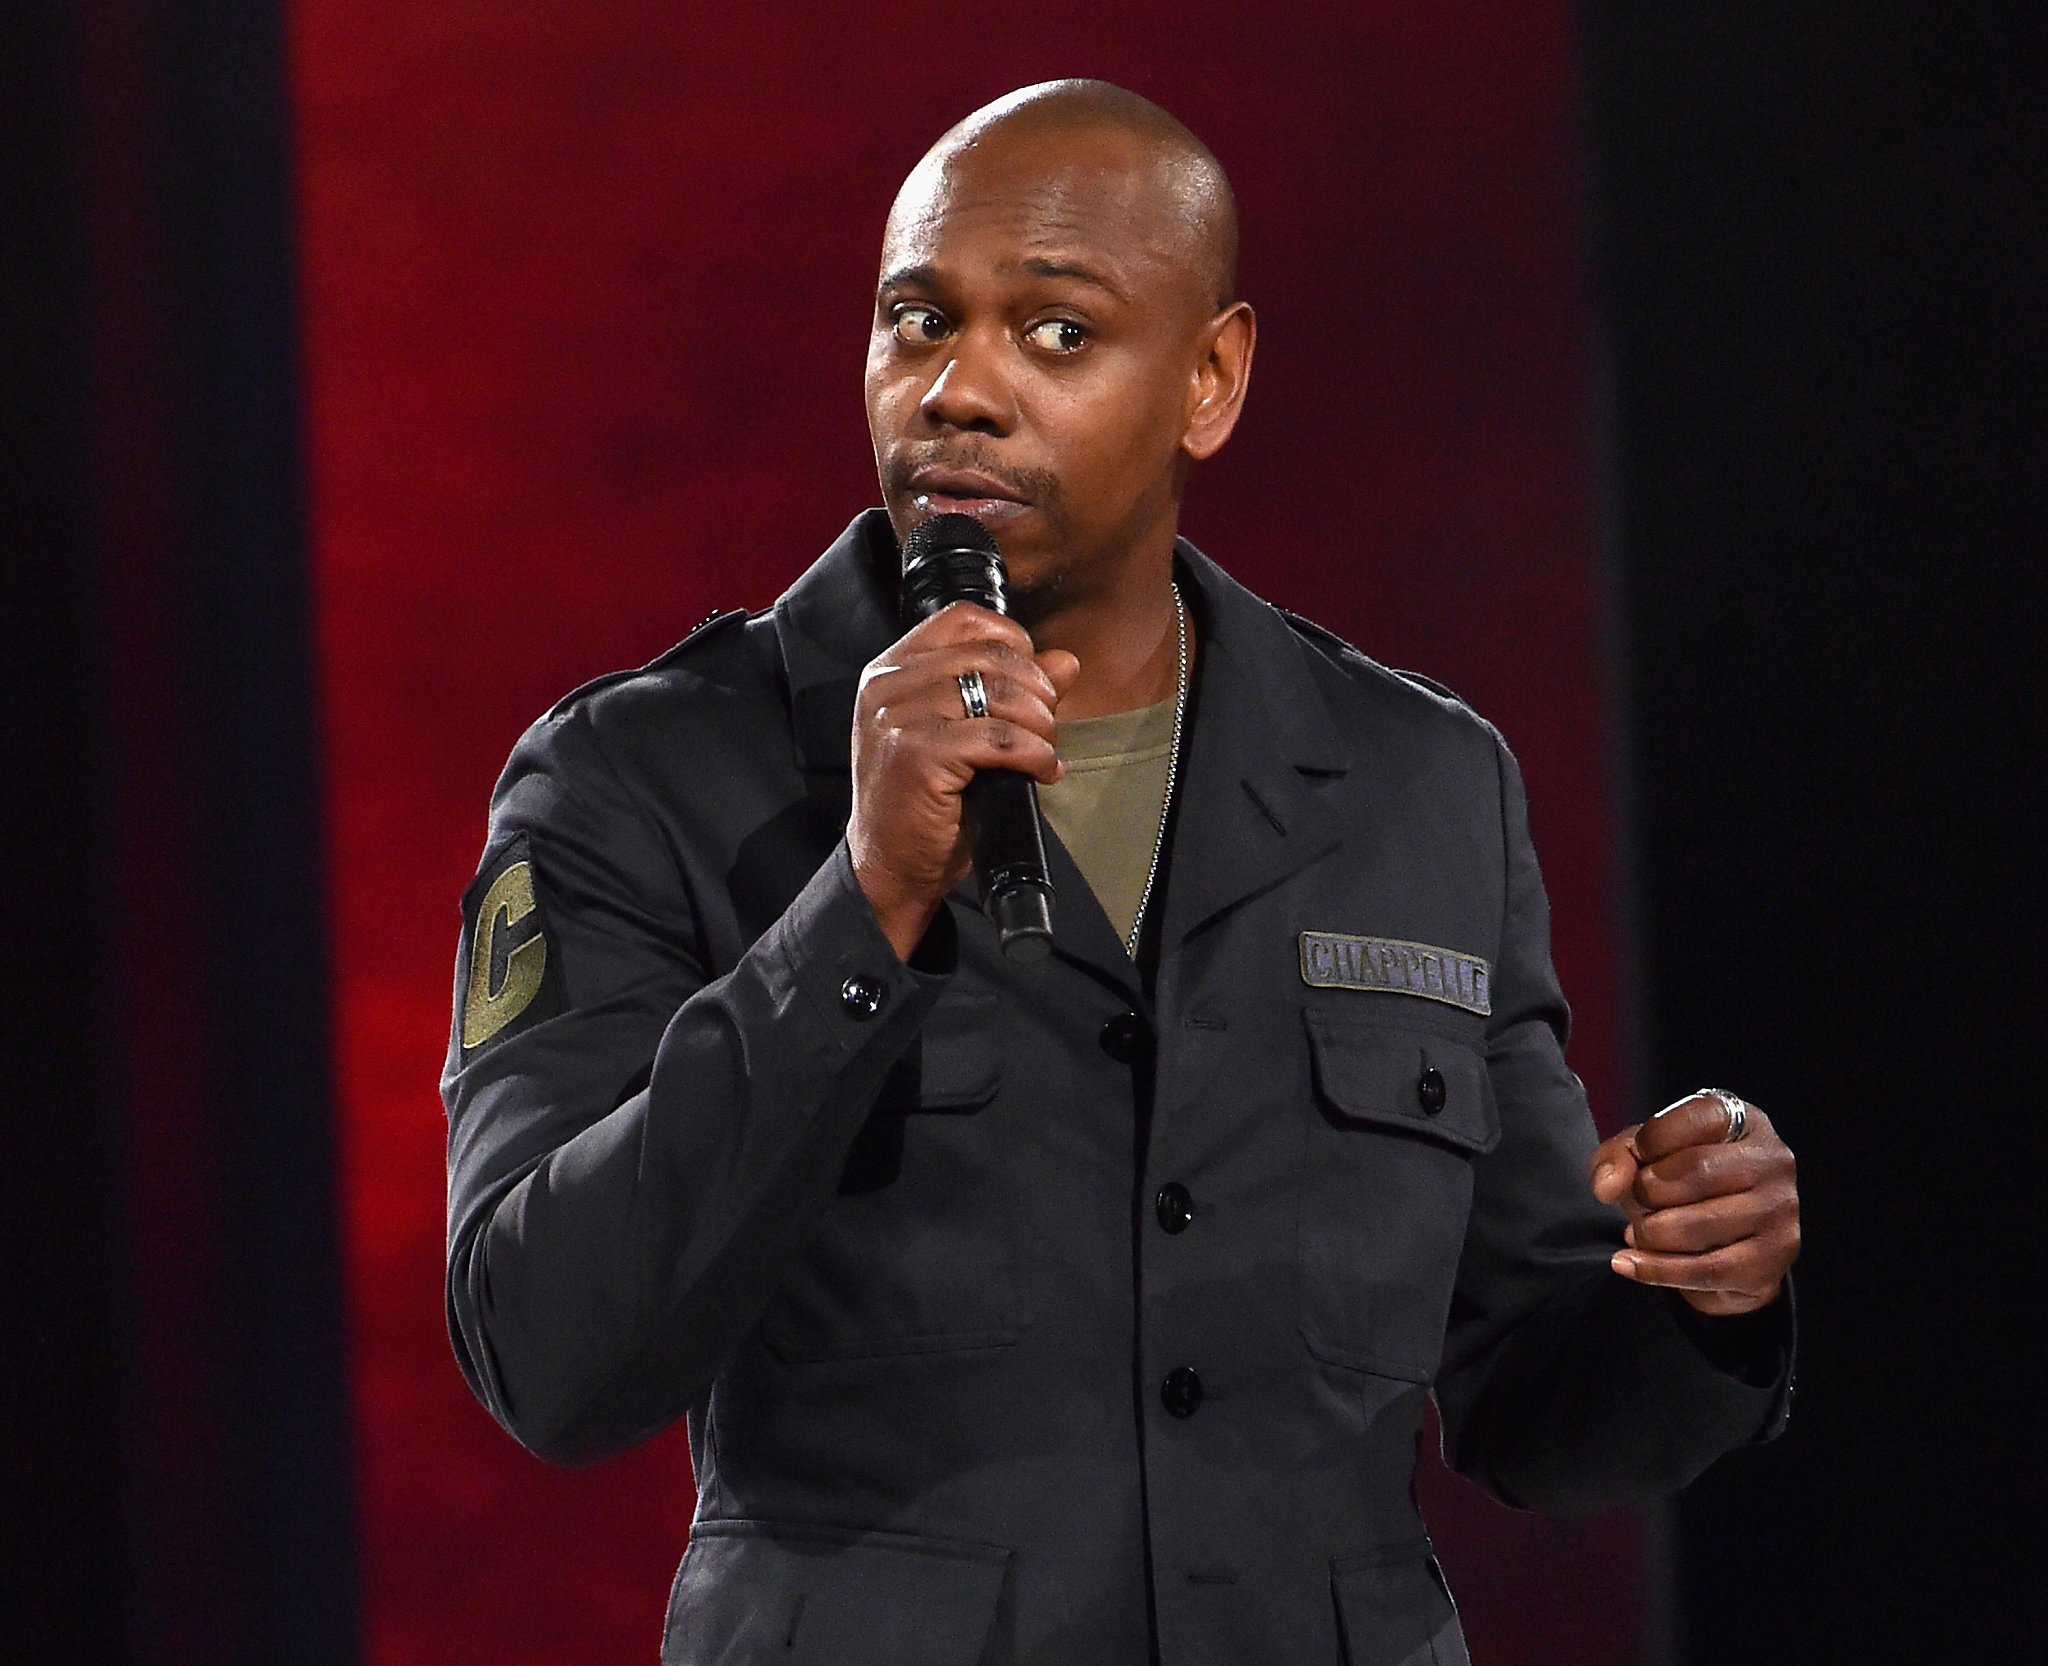 Dave Chappelle took Bay Area fans to church early Friday morning, appropria...